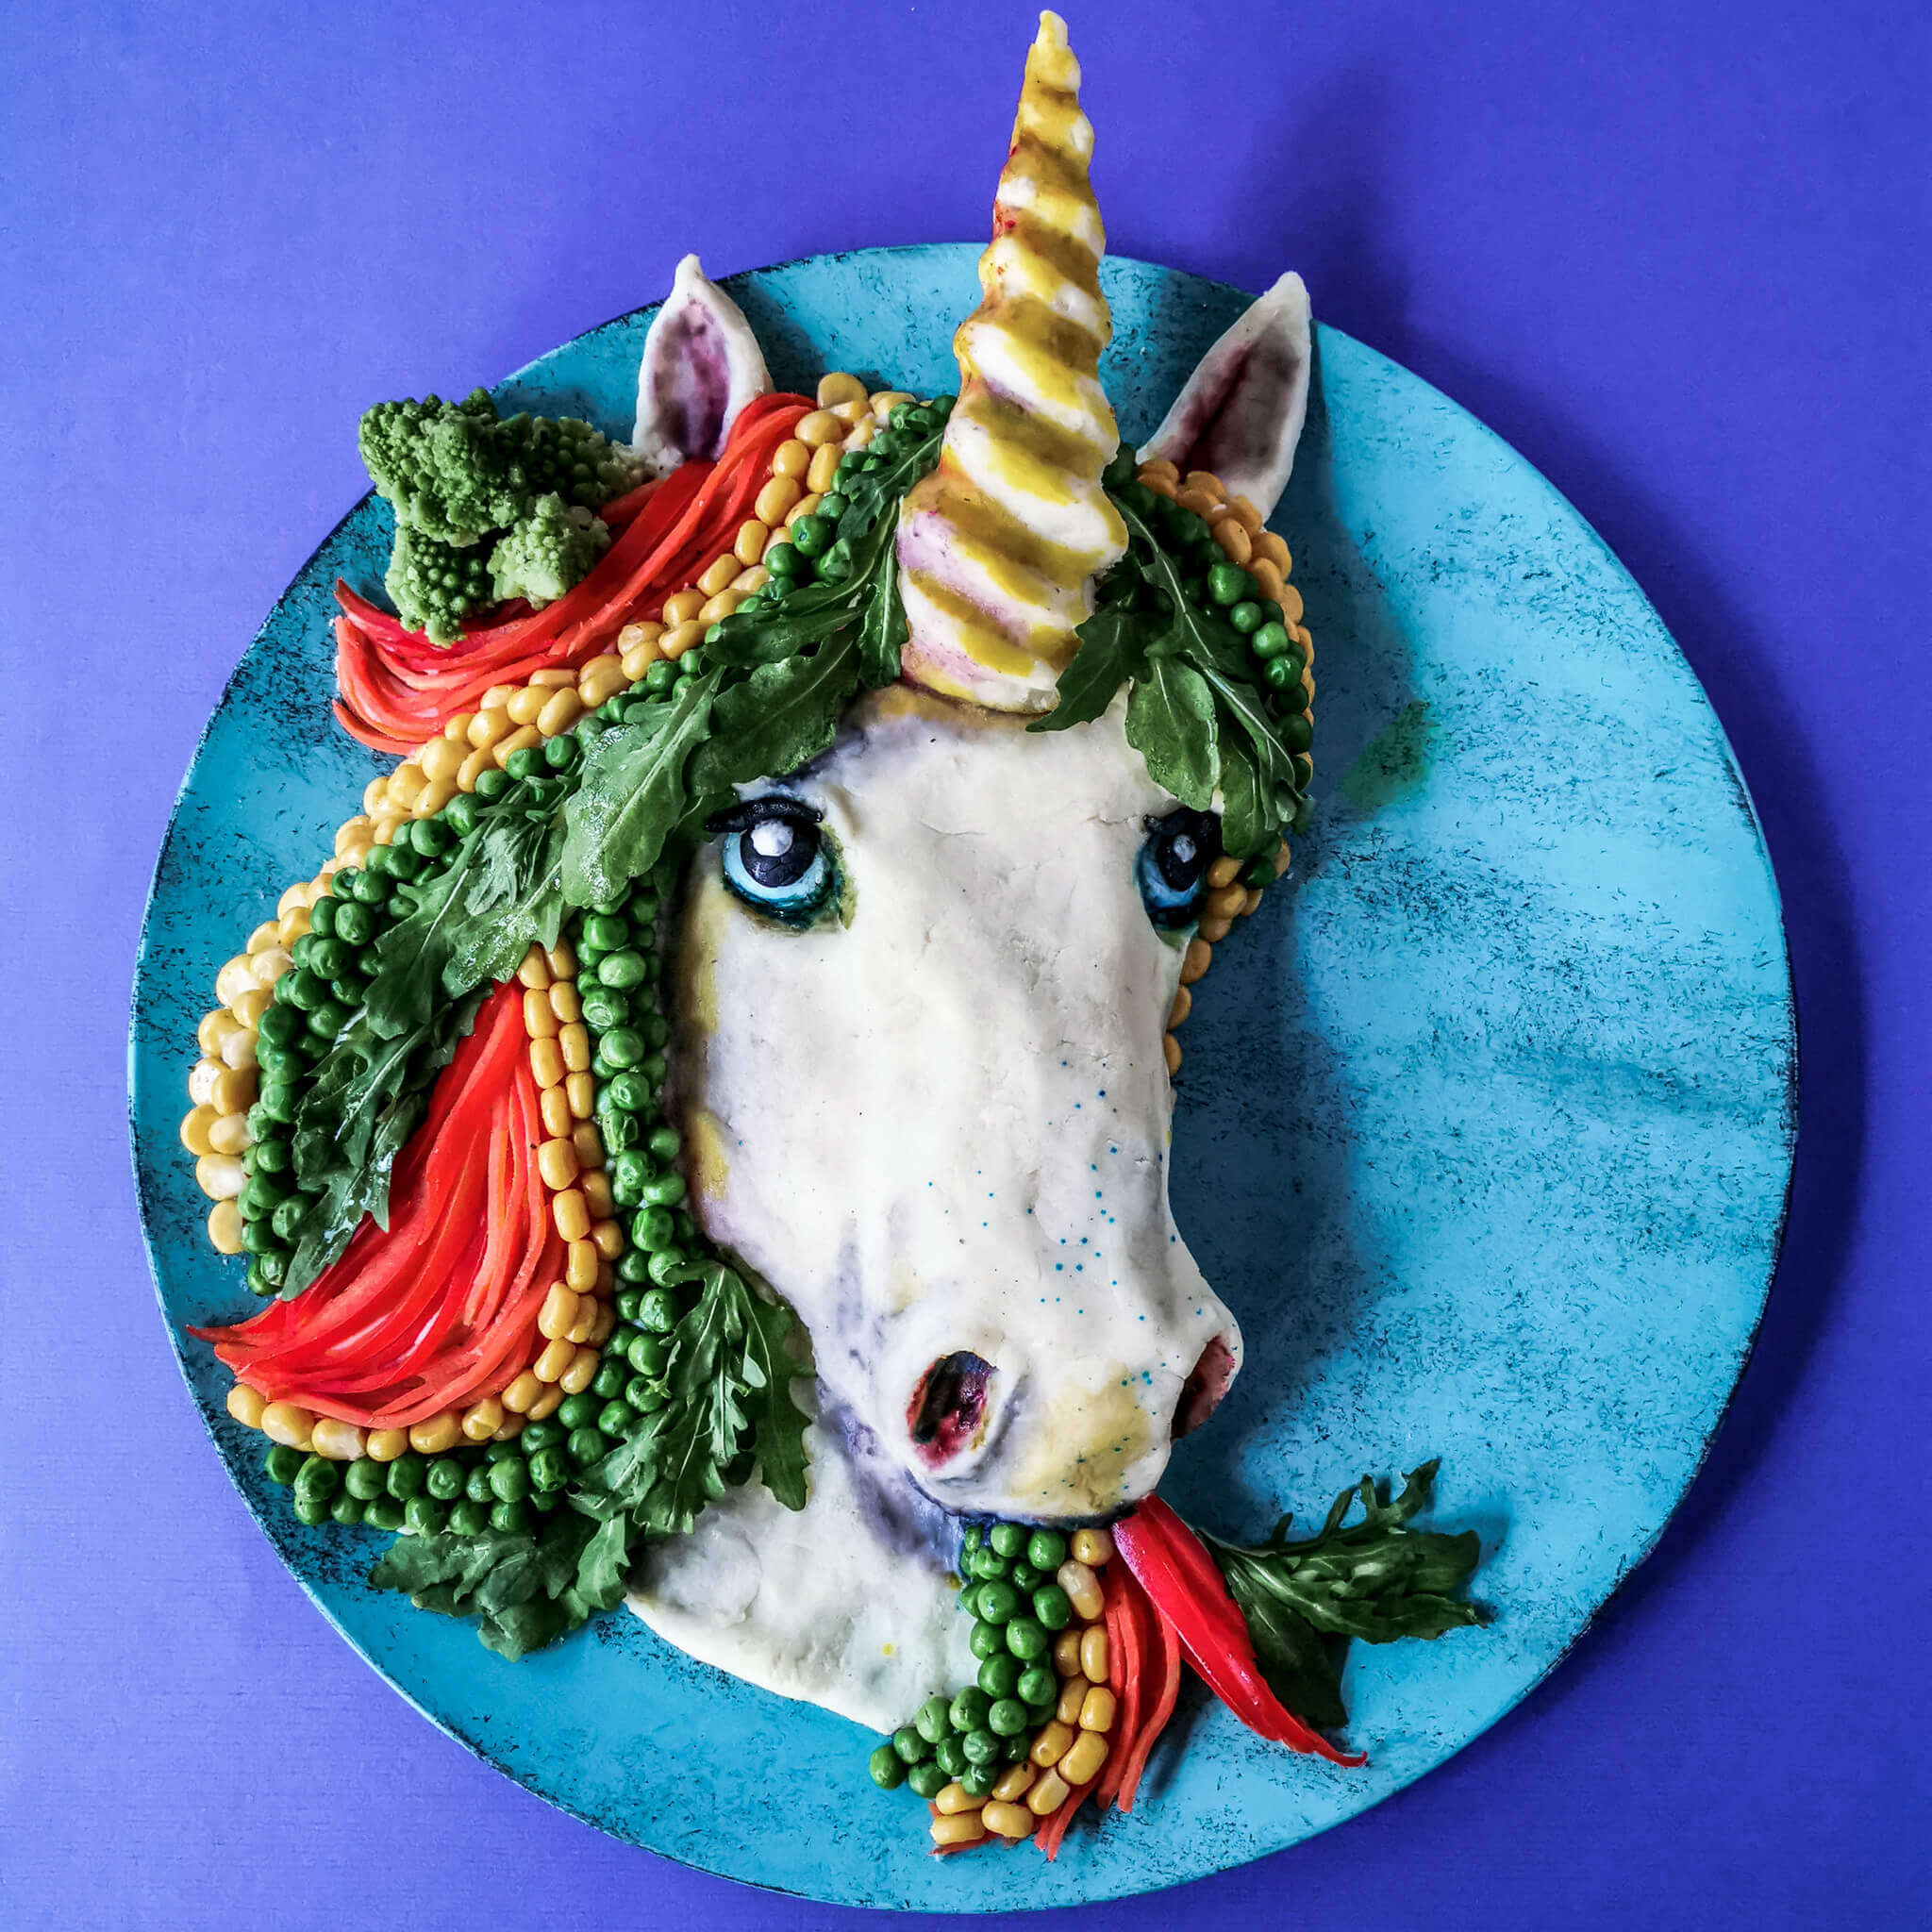 Unicorn arranged out of food